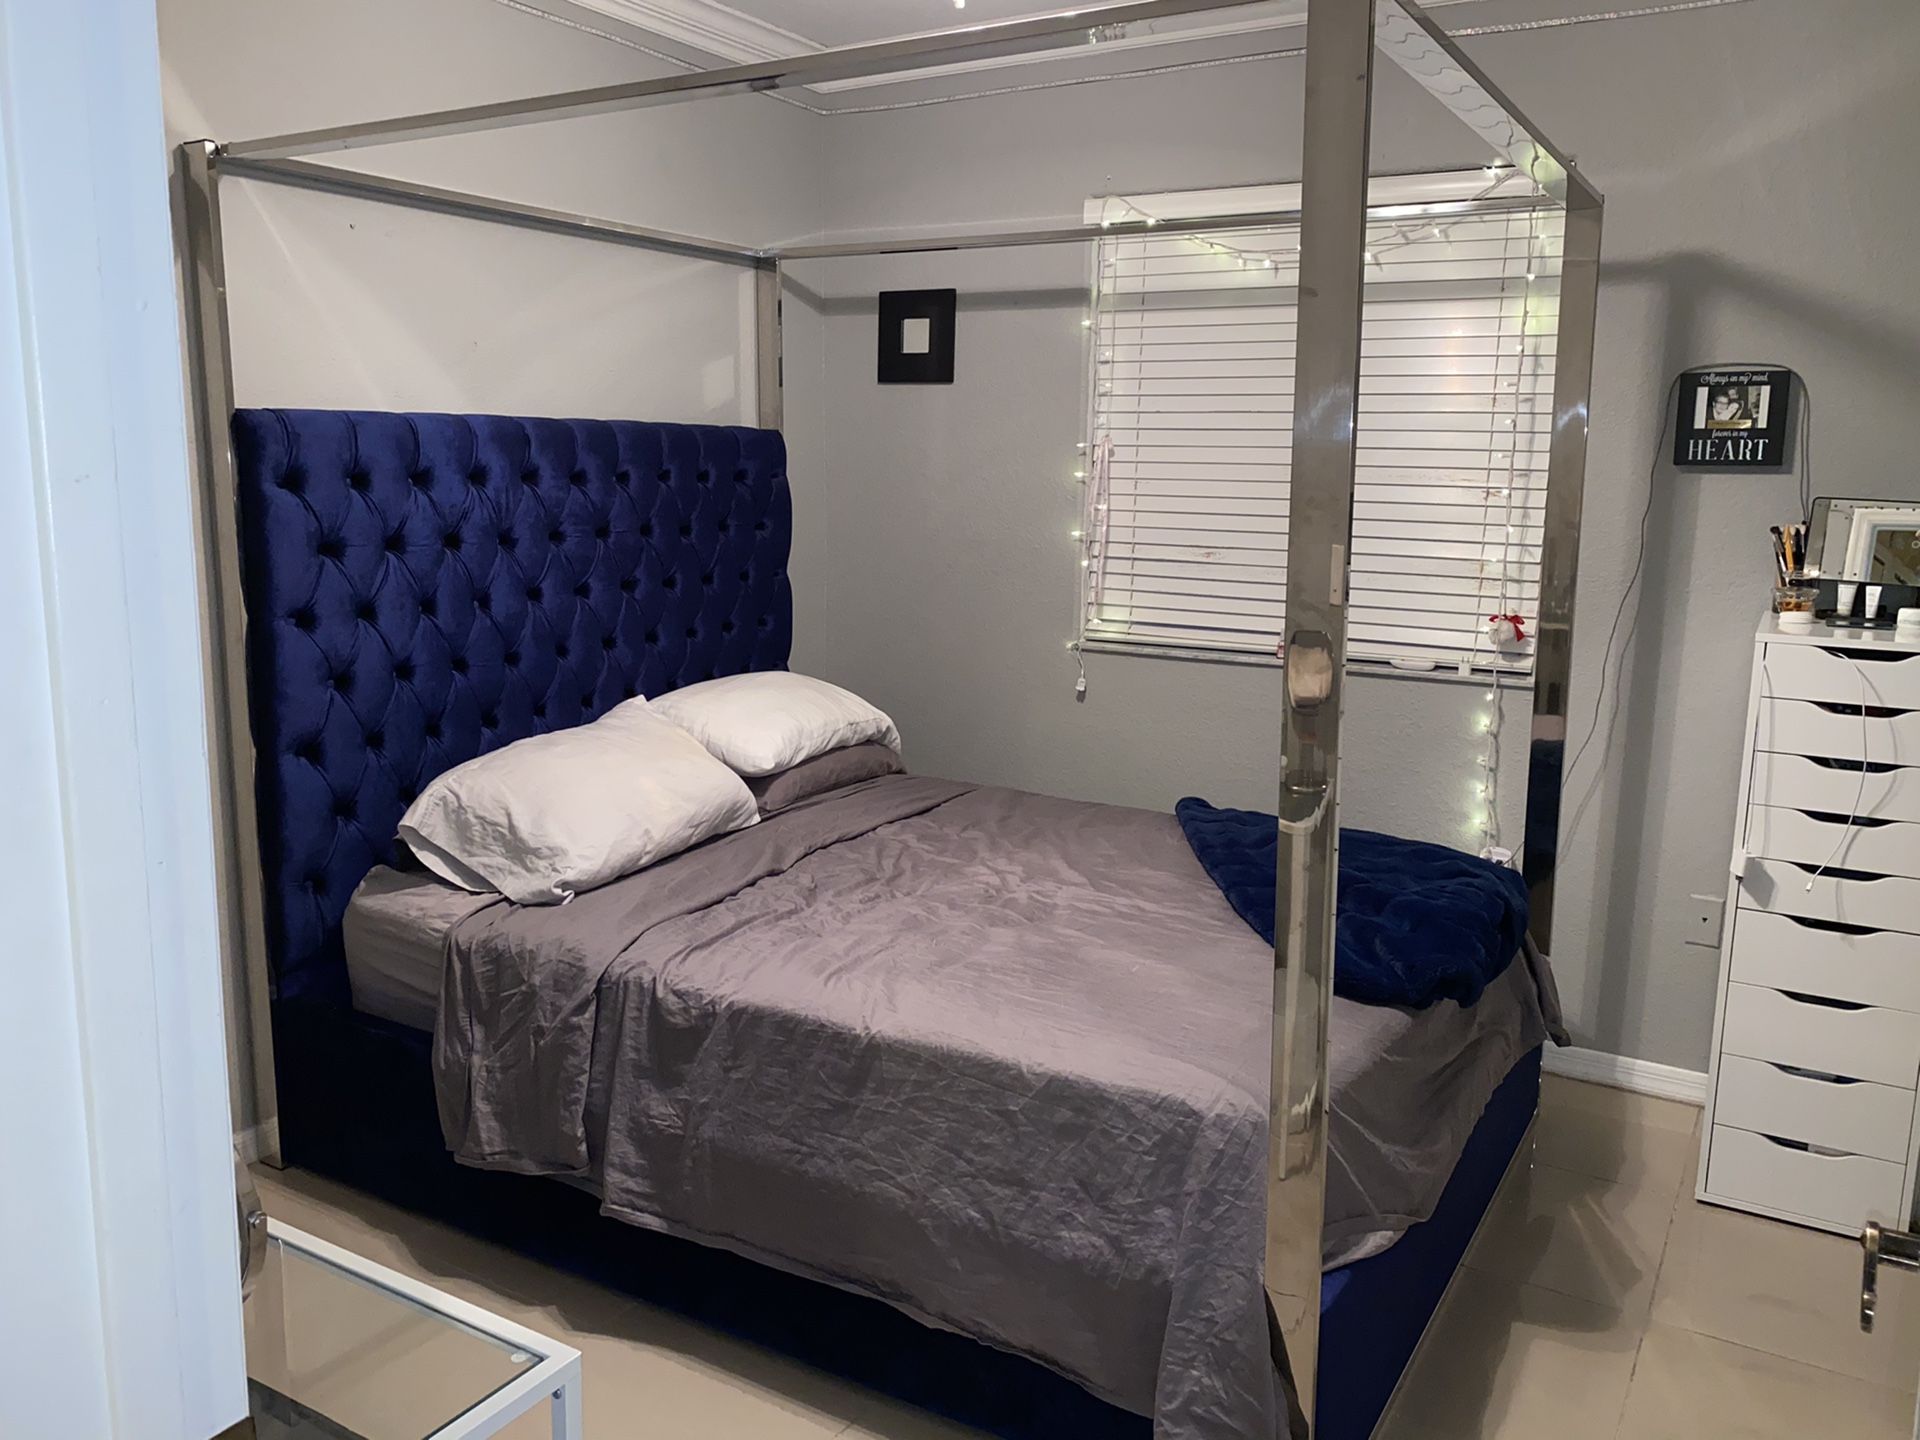 Queen Bed for sale! NEW